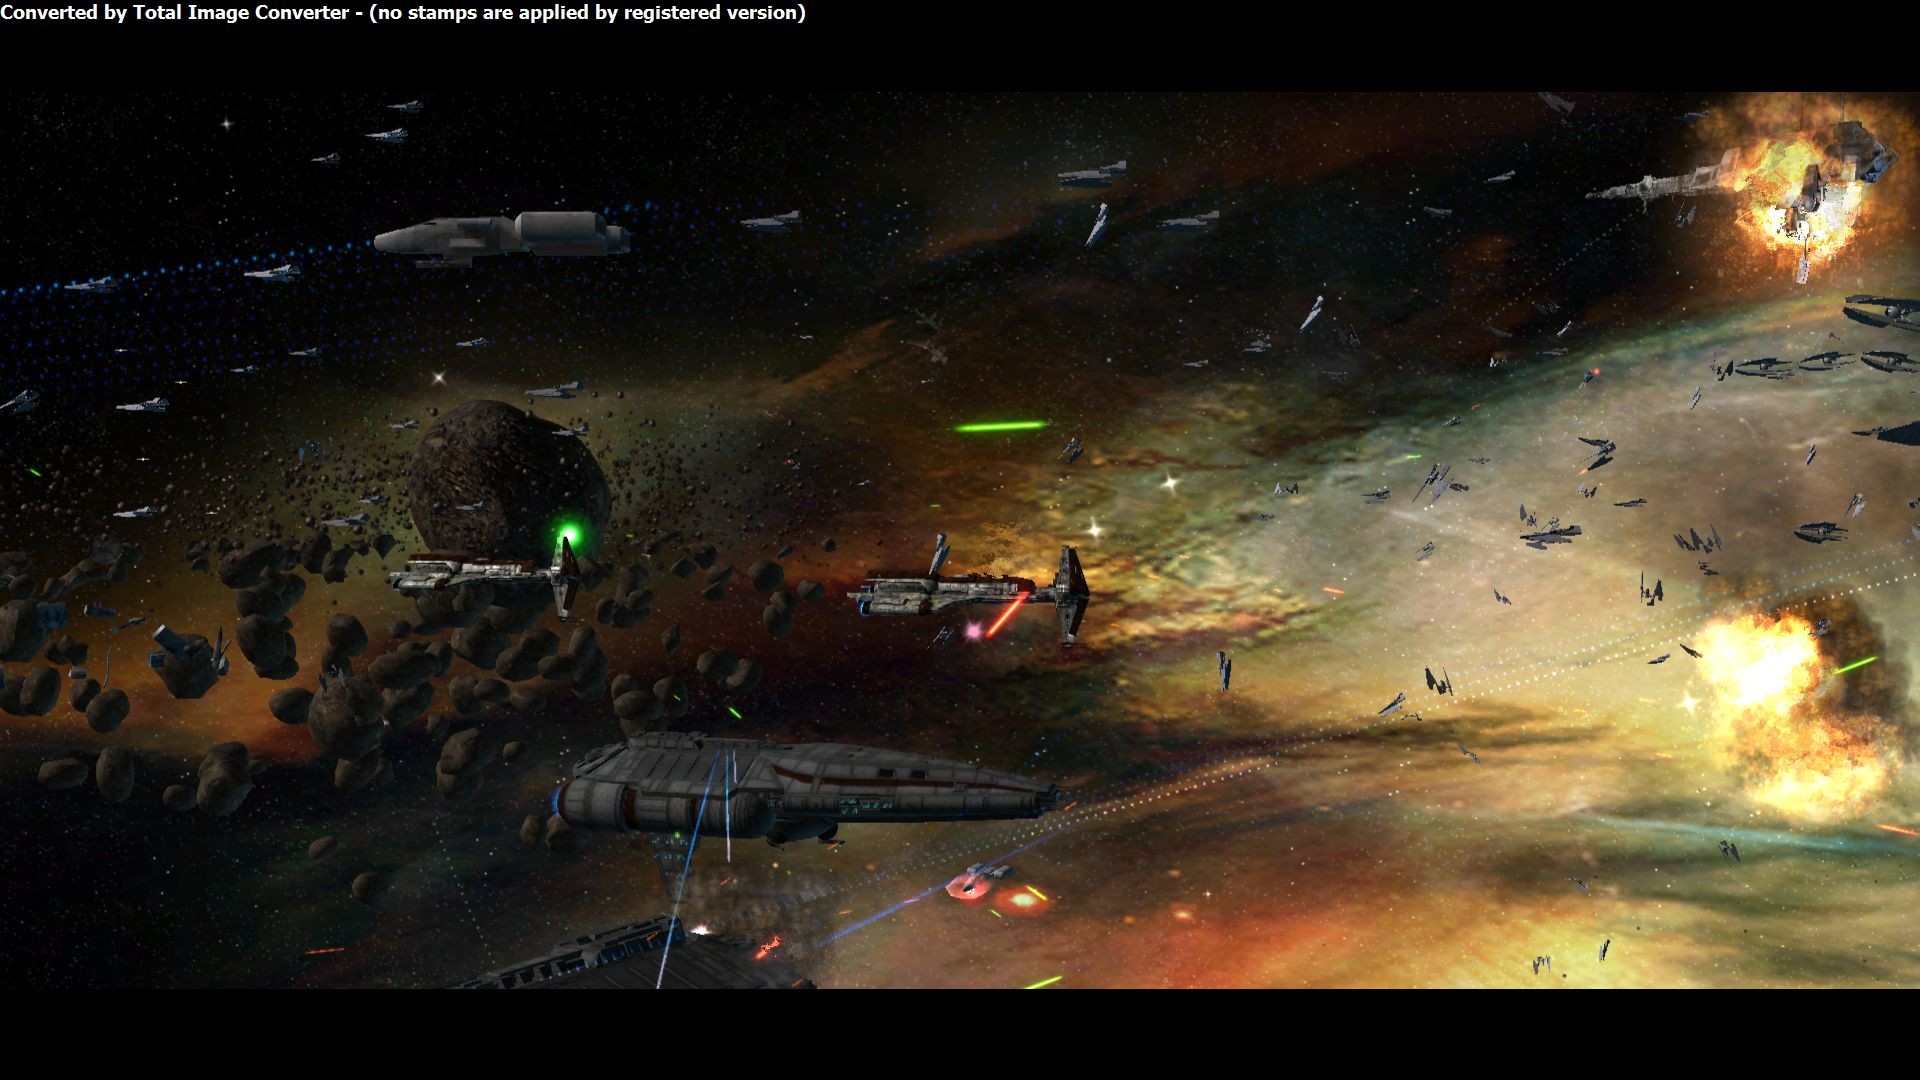 The most epic battle image – Old Republic at War mod for Star